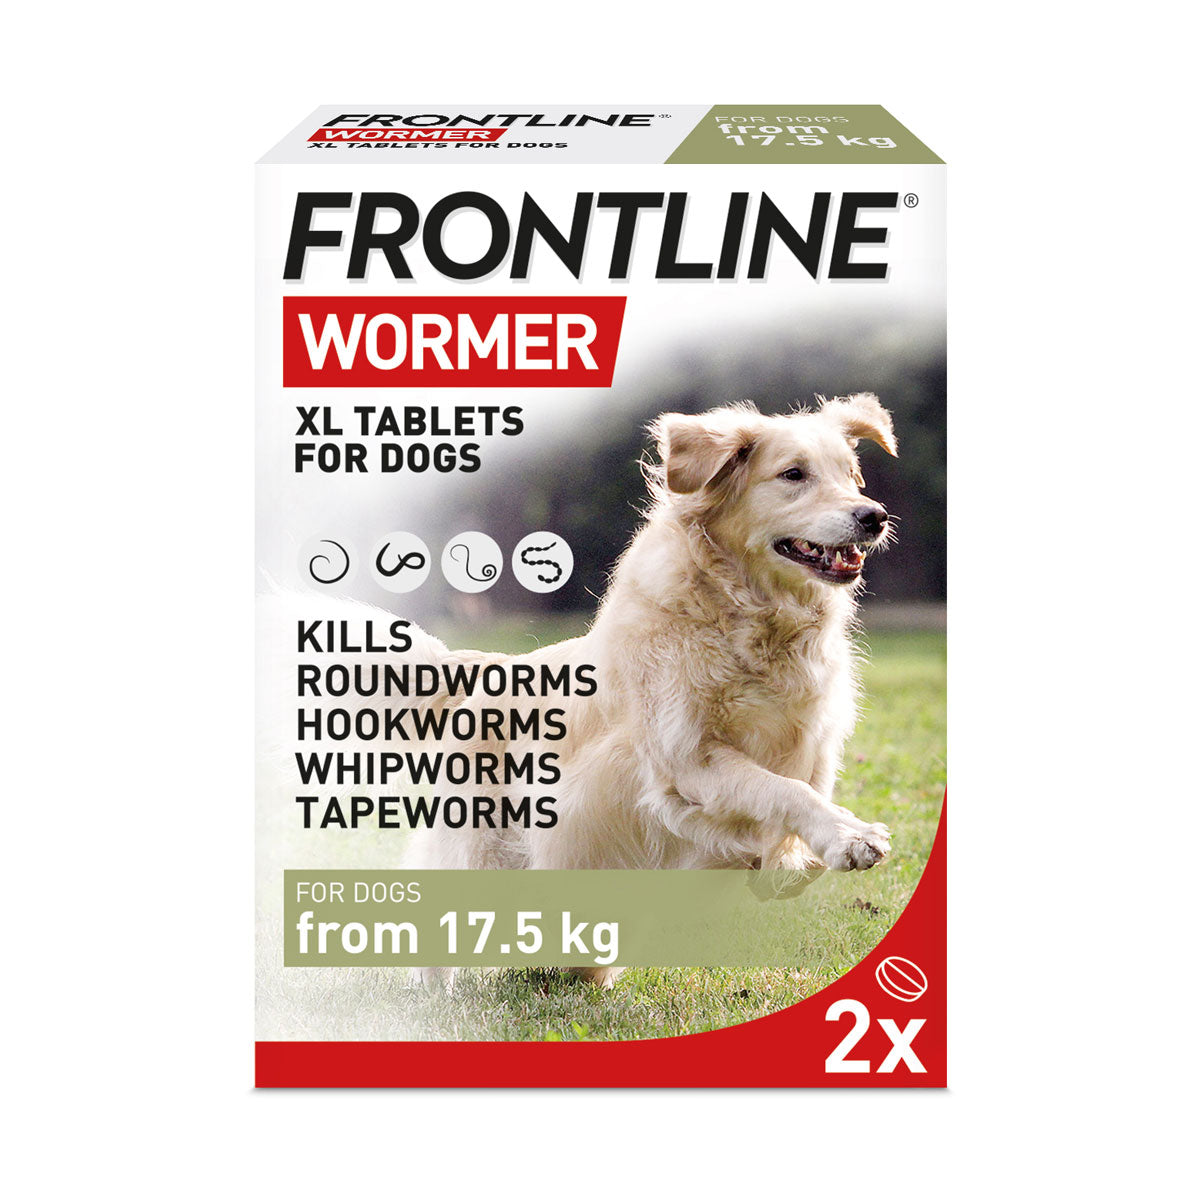 Frontline Wormer XL Tablets for Dogs